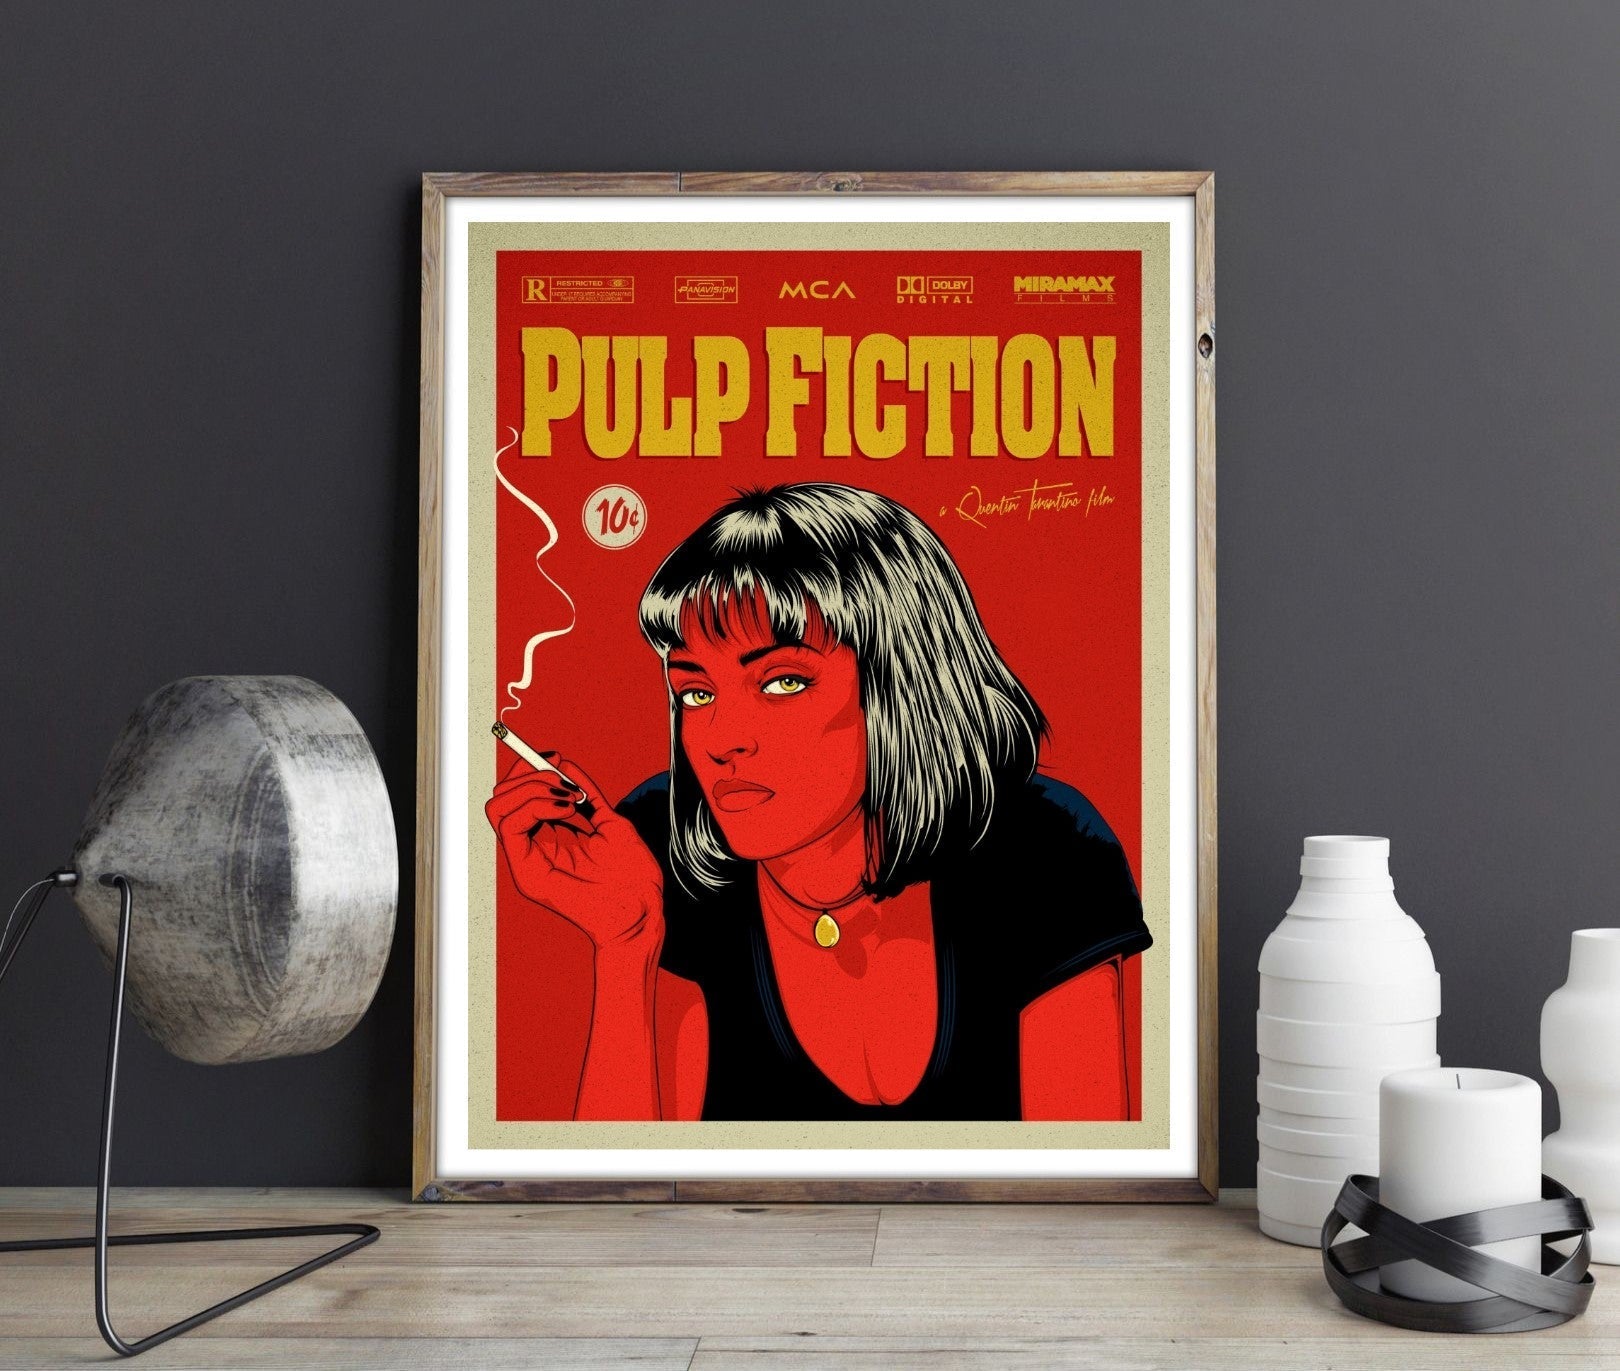 Art-Poster Movies - Pulp Fiction, by Joshua Budich